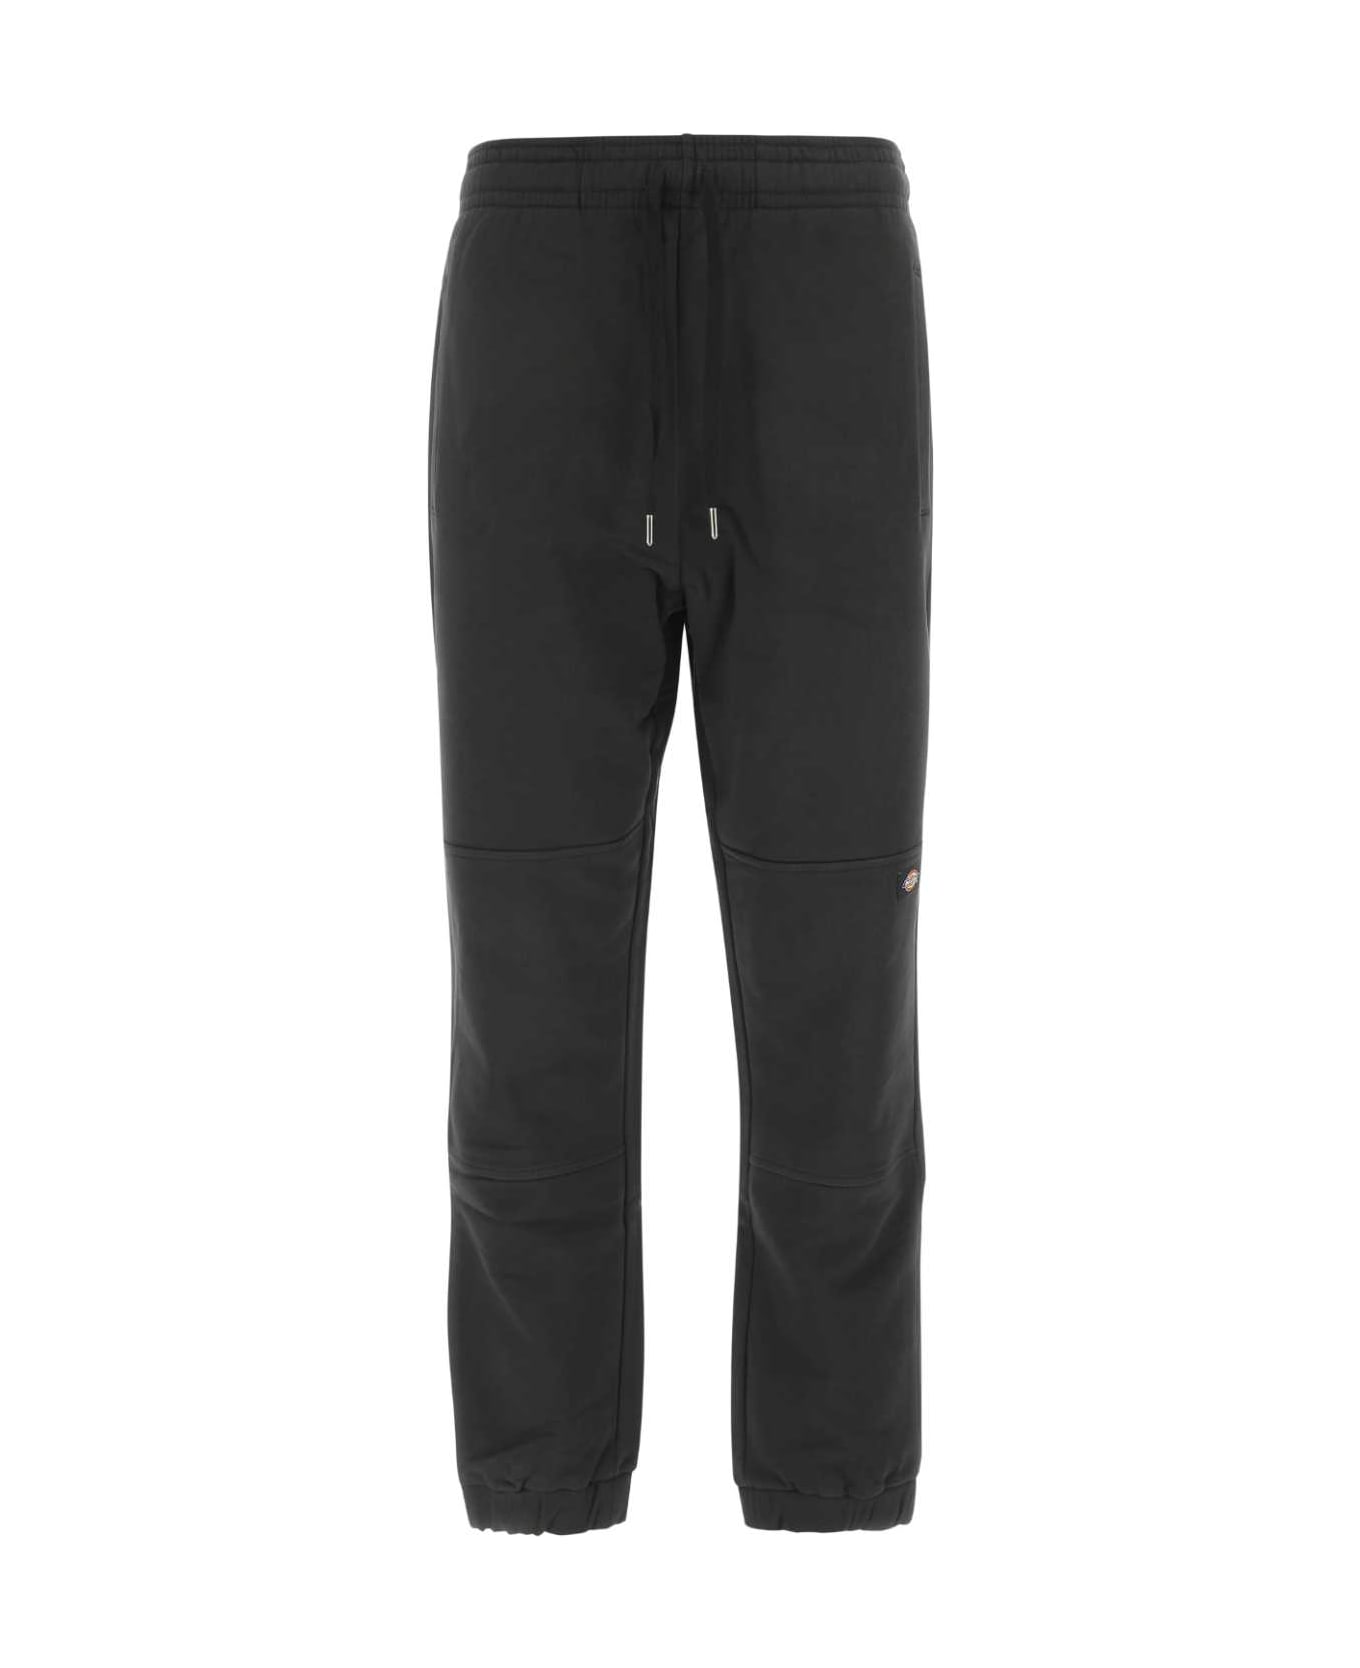 Dickies Black Cotton Blend Bienville Joggers - BLK1 ボトムス